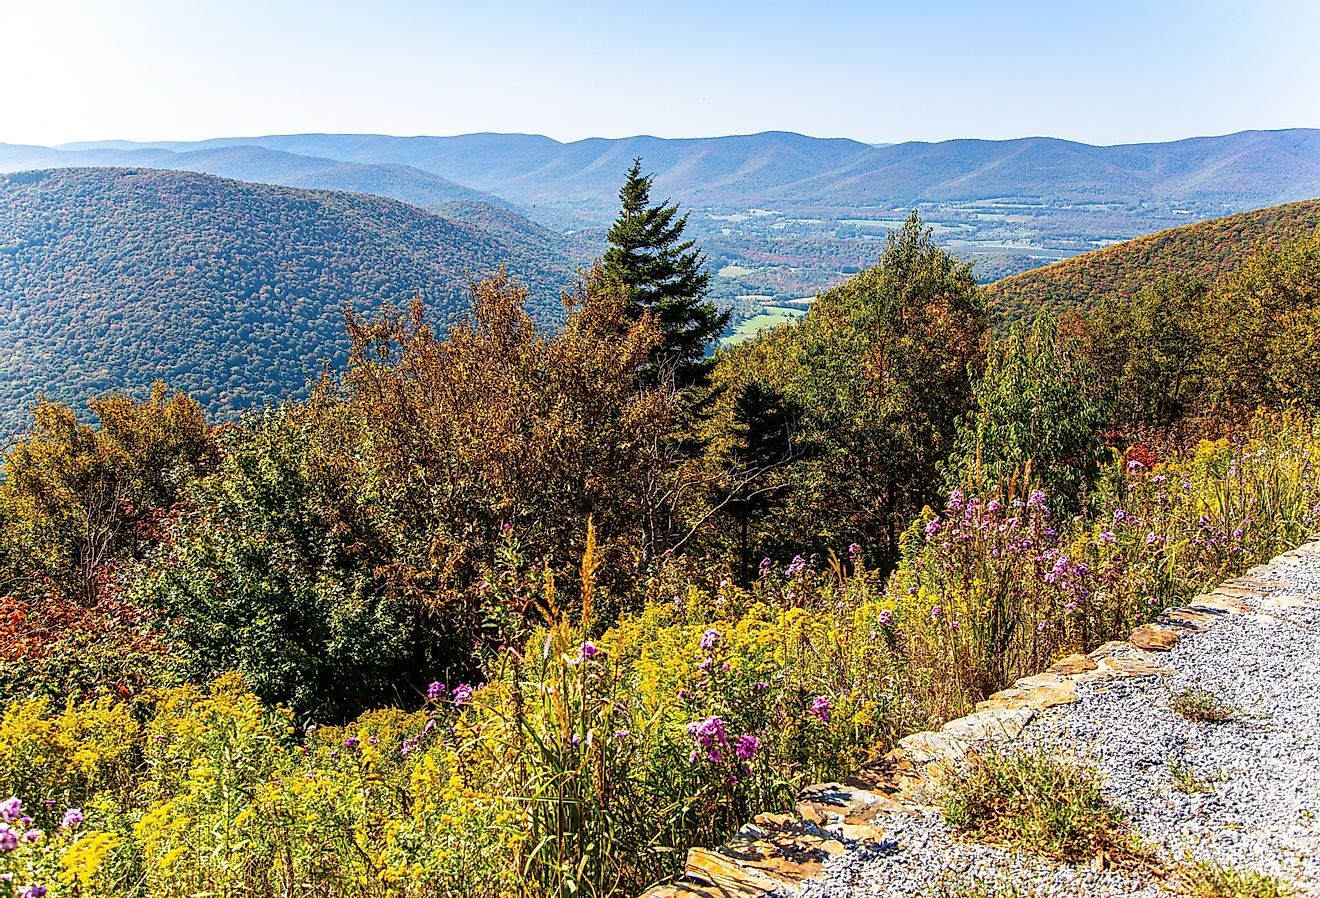 View from the side of Mount Greylock in the fall in Lanesborough, Massachusetts.